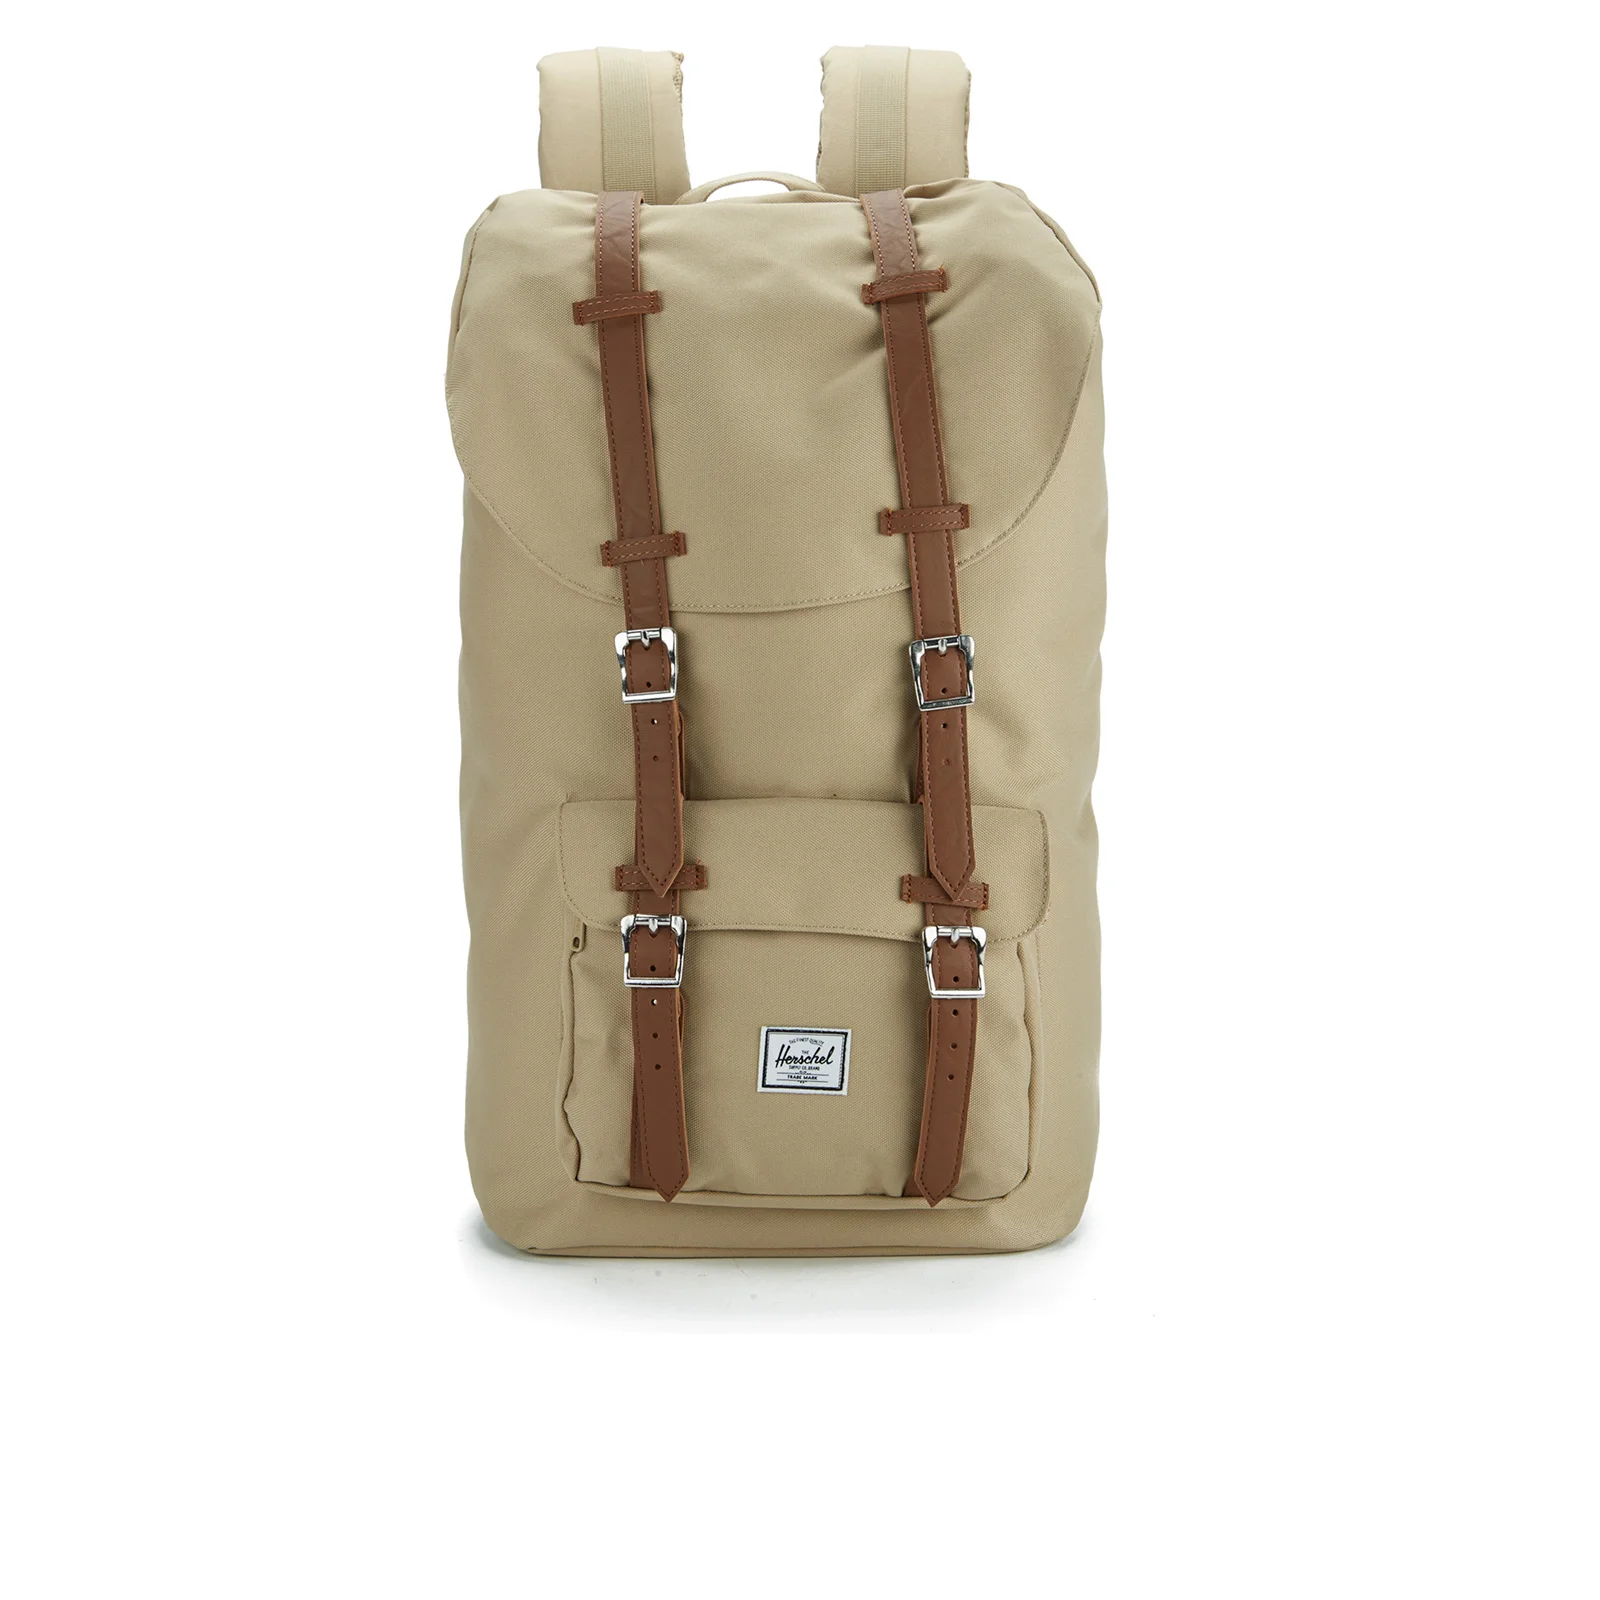 Herschel Supply Co. Little America Backpack - Khaki/Tan Synthetic Leather Image 1